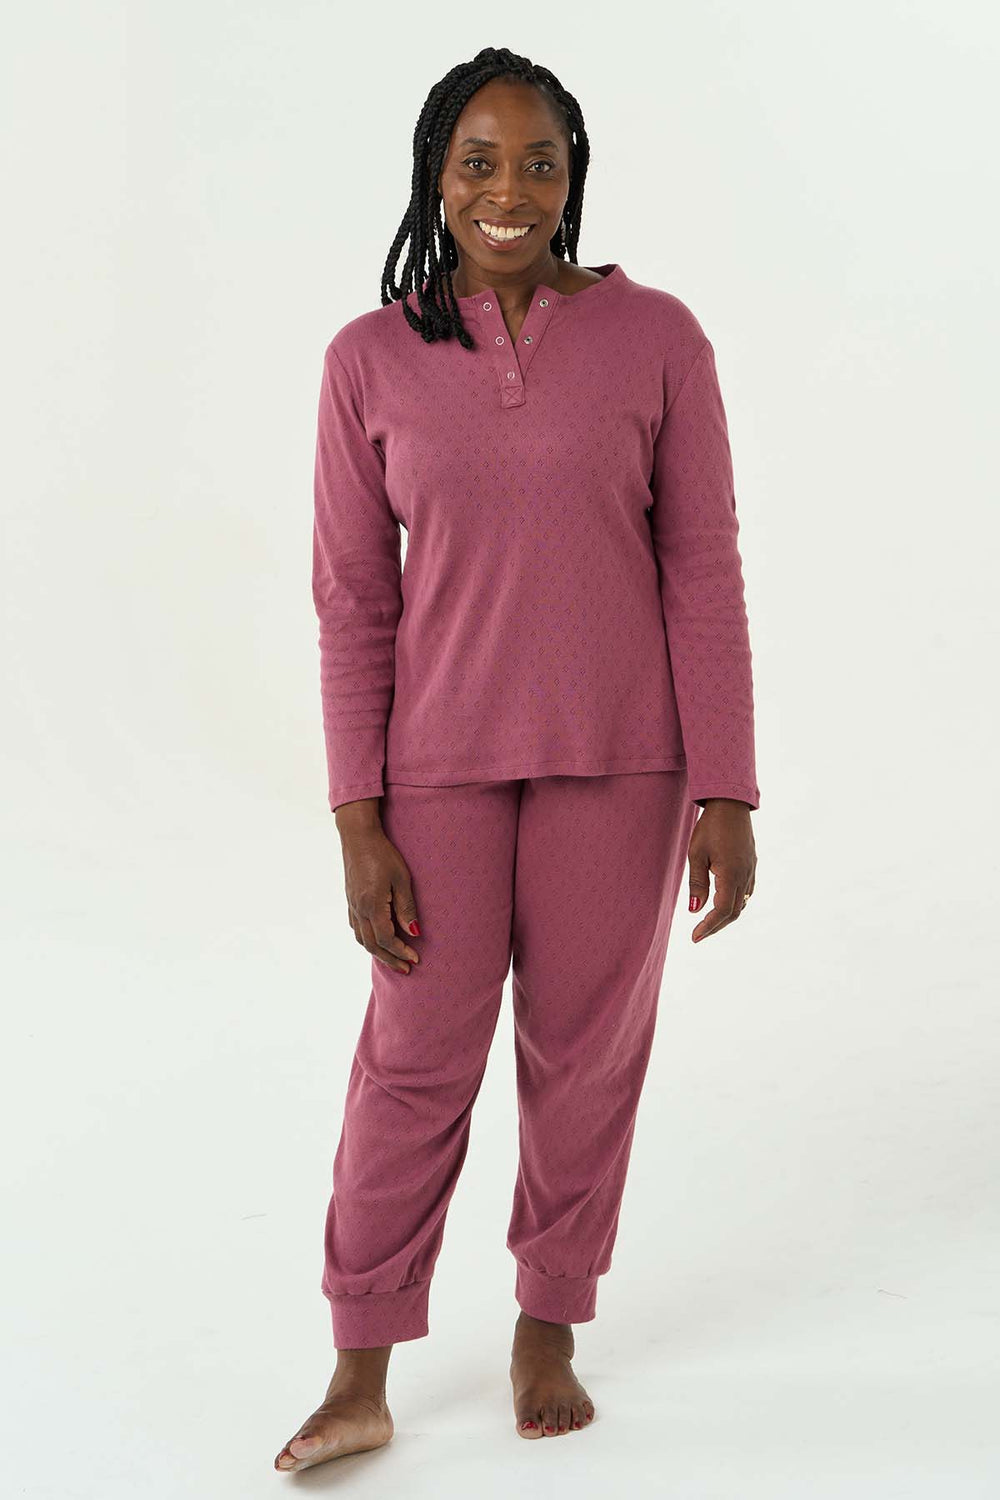 Woman wearing the Imogen Pyjamas sewing pattern from Sew Over It on The Fold Line. A Pyjamas pattern made in viscose or bamboo jersey, French terry or lightweight cotton jersey fabrics, featuring bottoms with elasticated waistband, full length leg with na